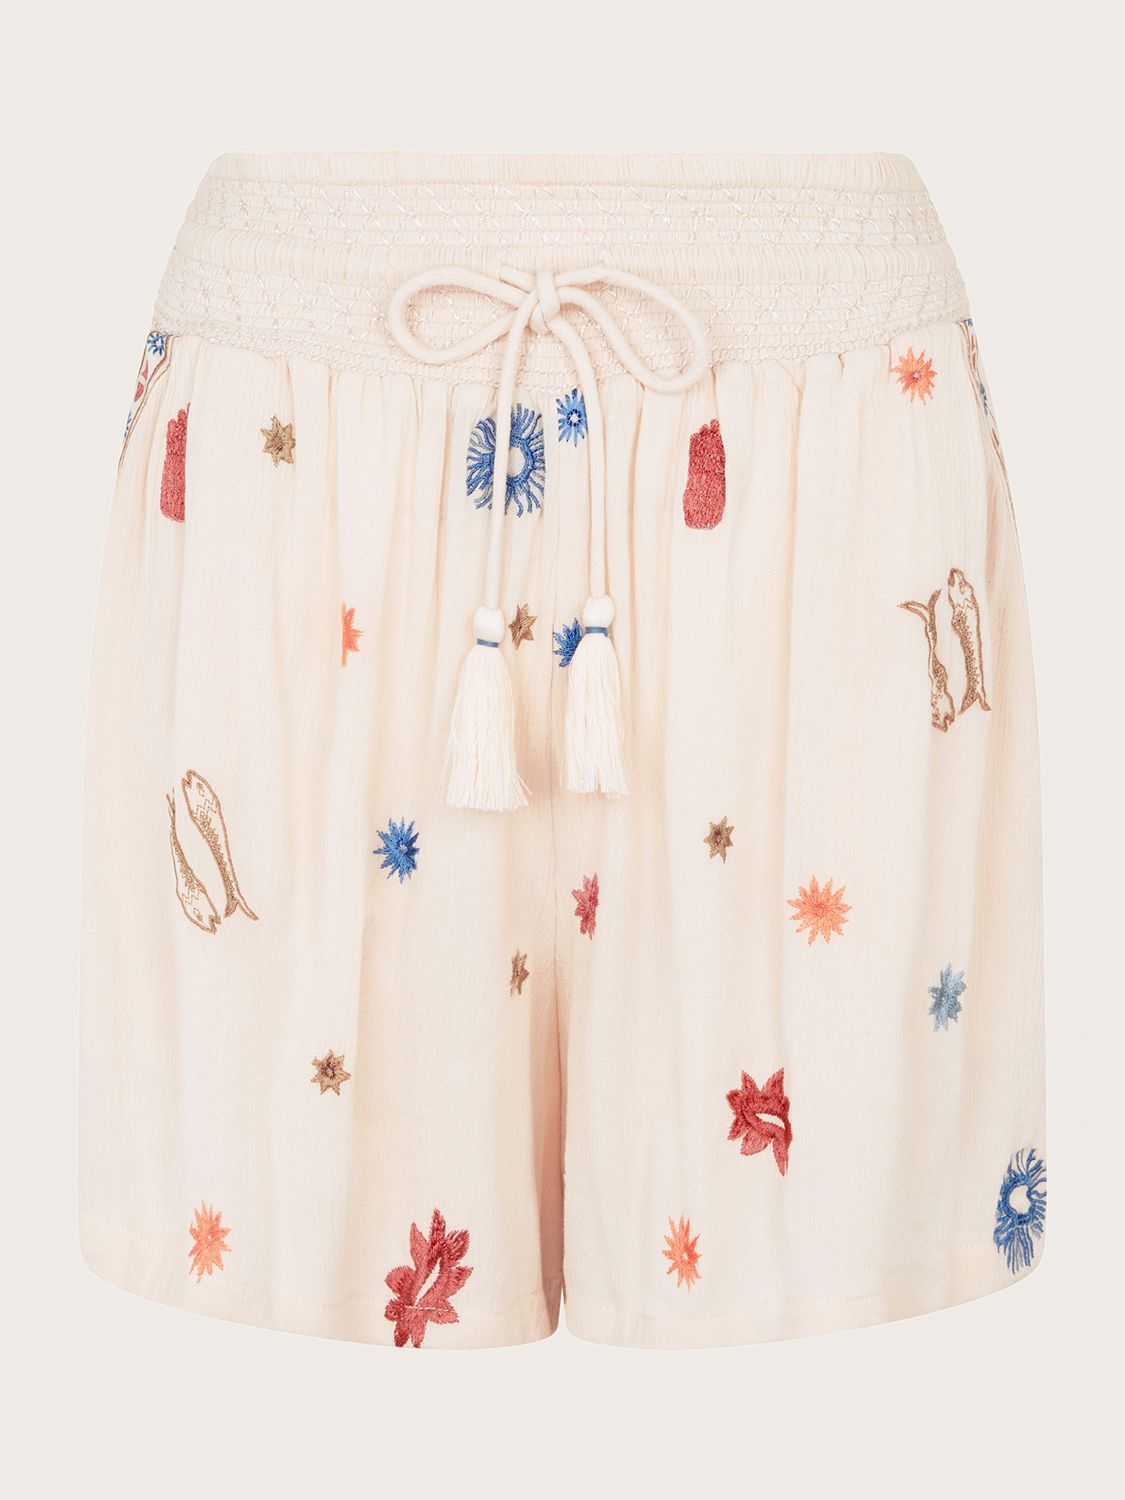 Monsoon Embroidered Shorts, Ivory/Multi, S